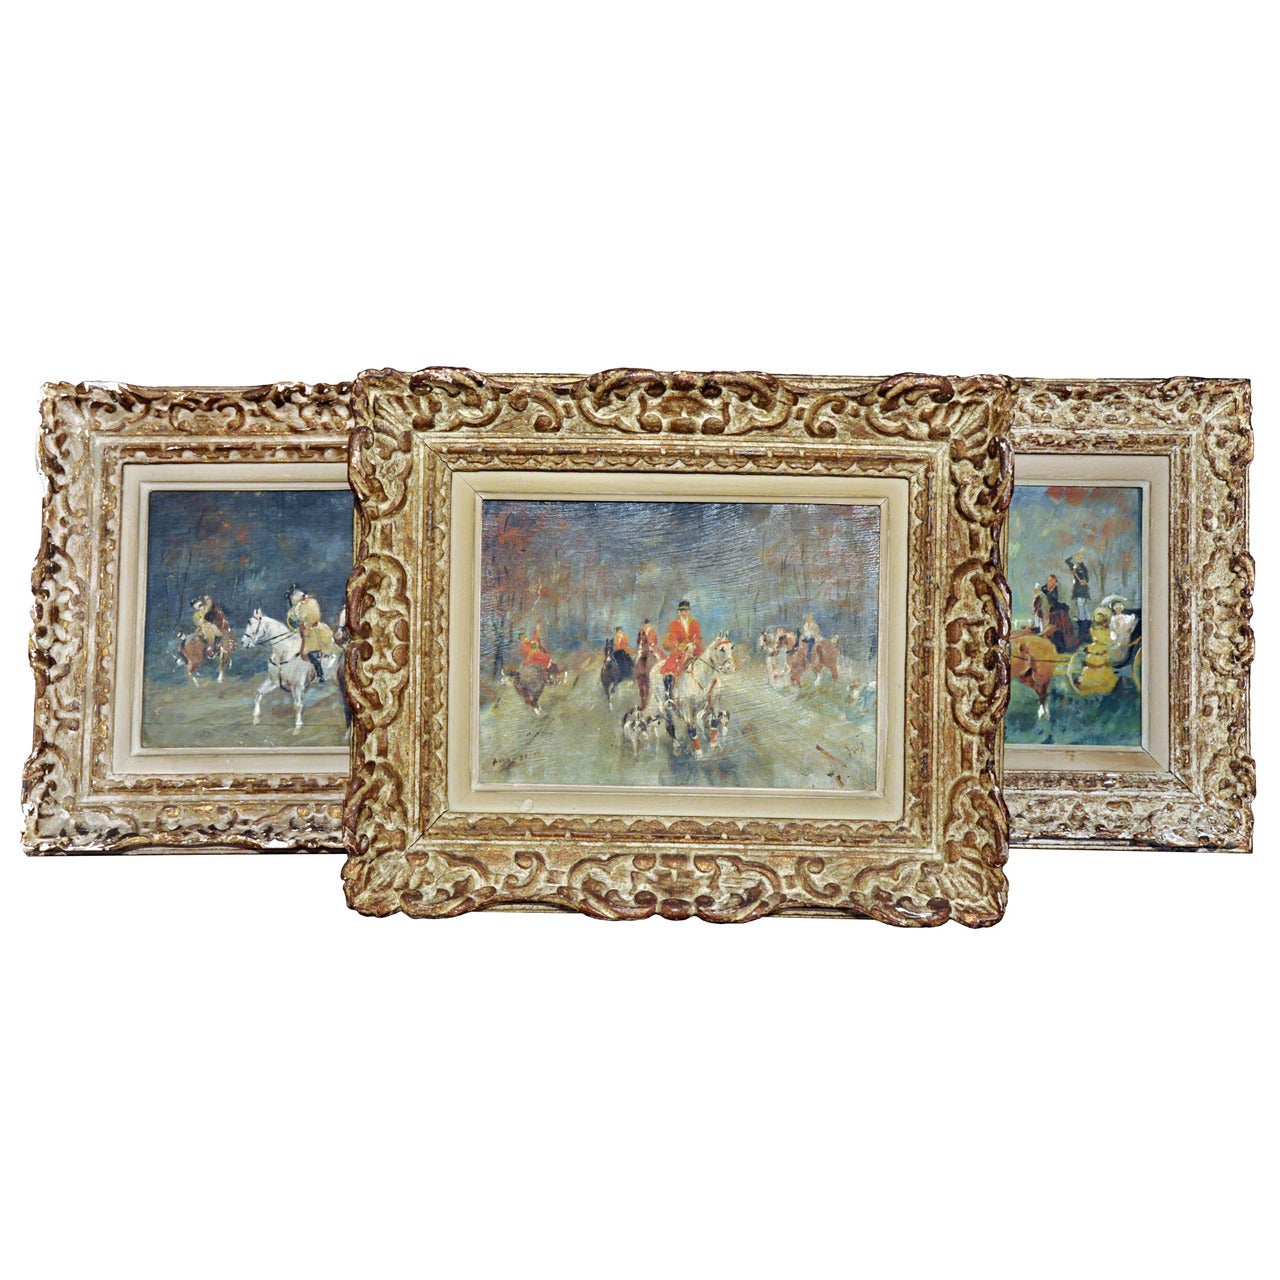 Set of 3 Framed 19th C. Equestrian Paintings on wood panel